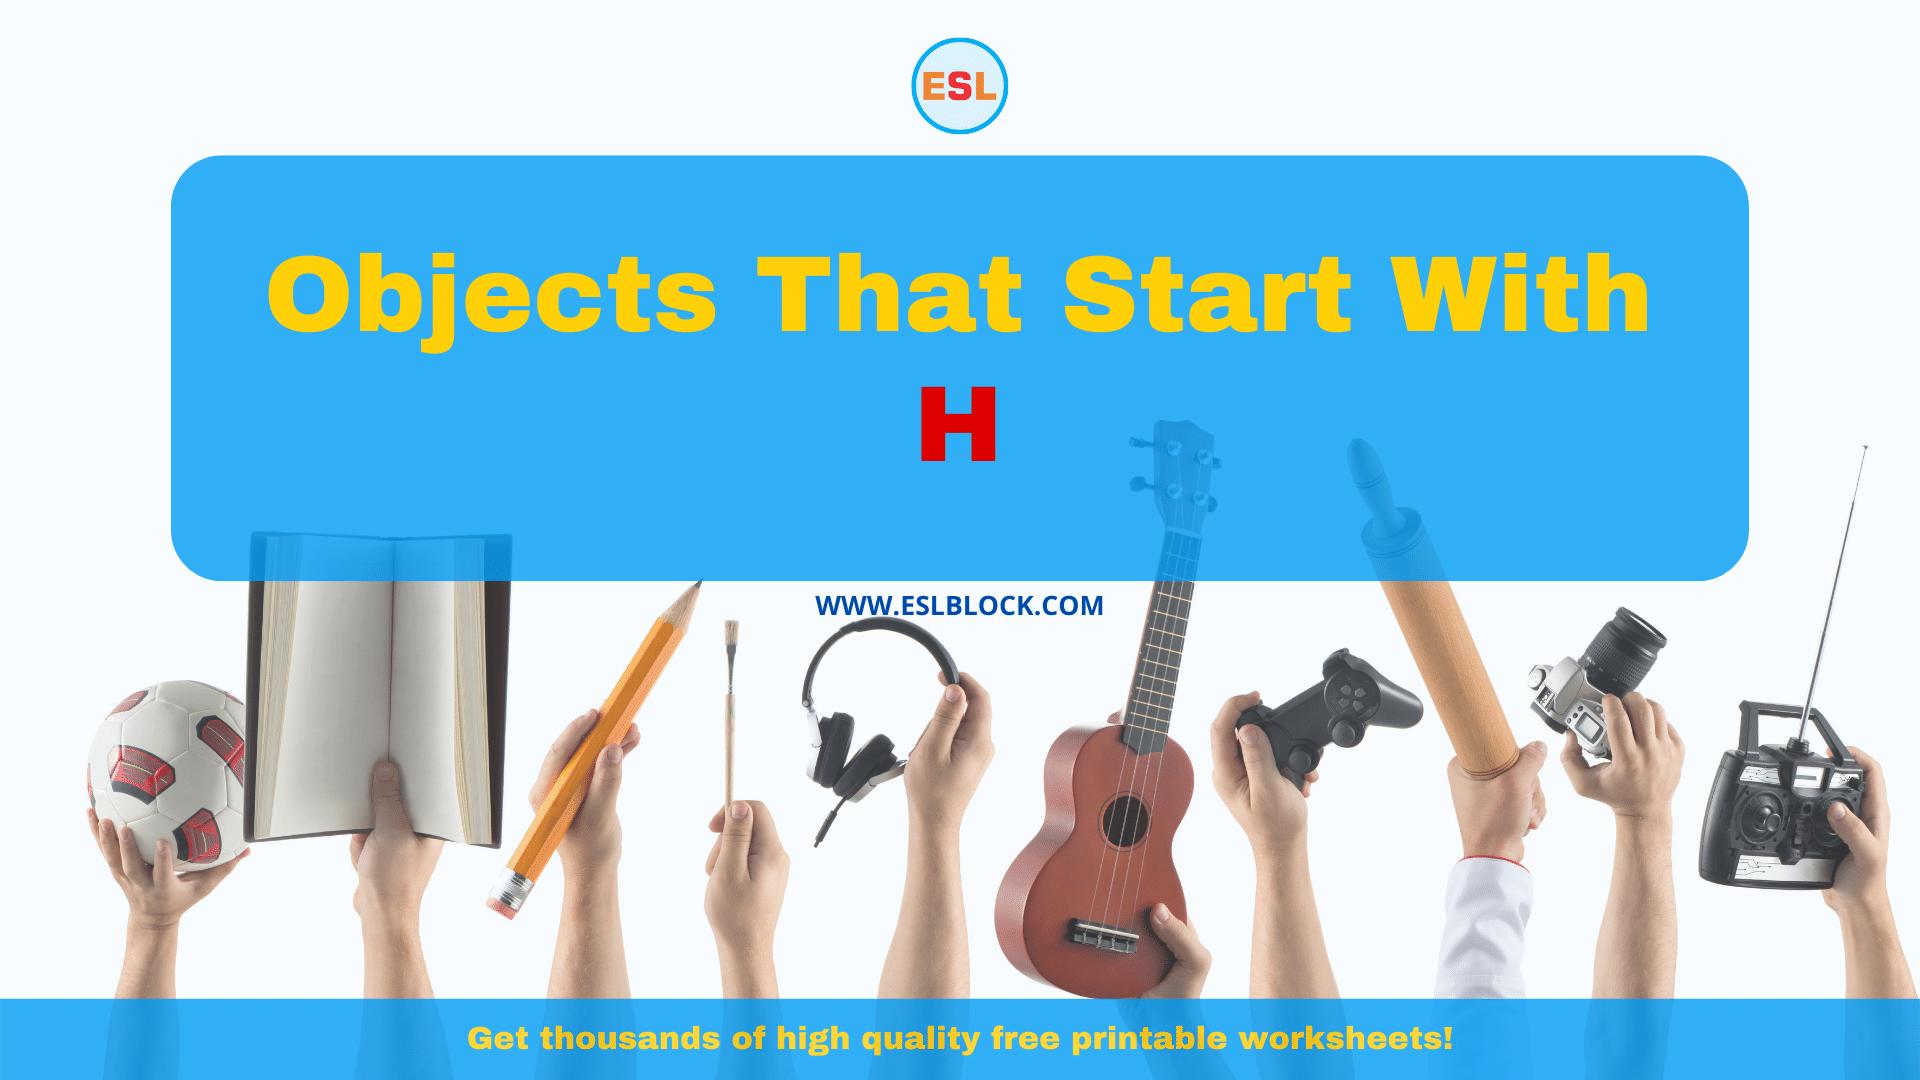 5 Letter Objects Starting With H, English, English Nouns, English Vocabulary, English Words, H Objects, H Objects in English, H Objects Names, List of Objects That Start With H, Nouns, Objects List, Objects That Start With H, Things Names, Vocabulary